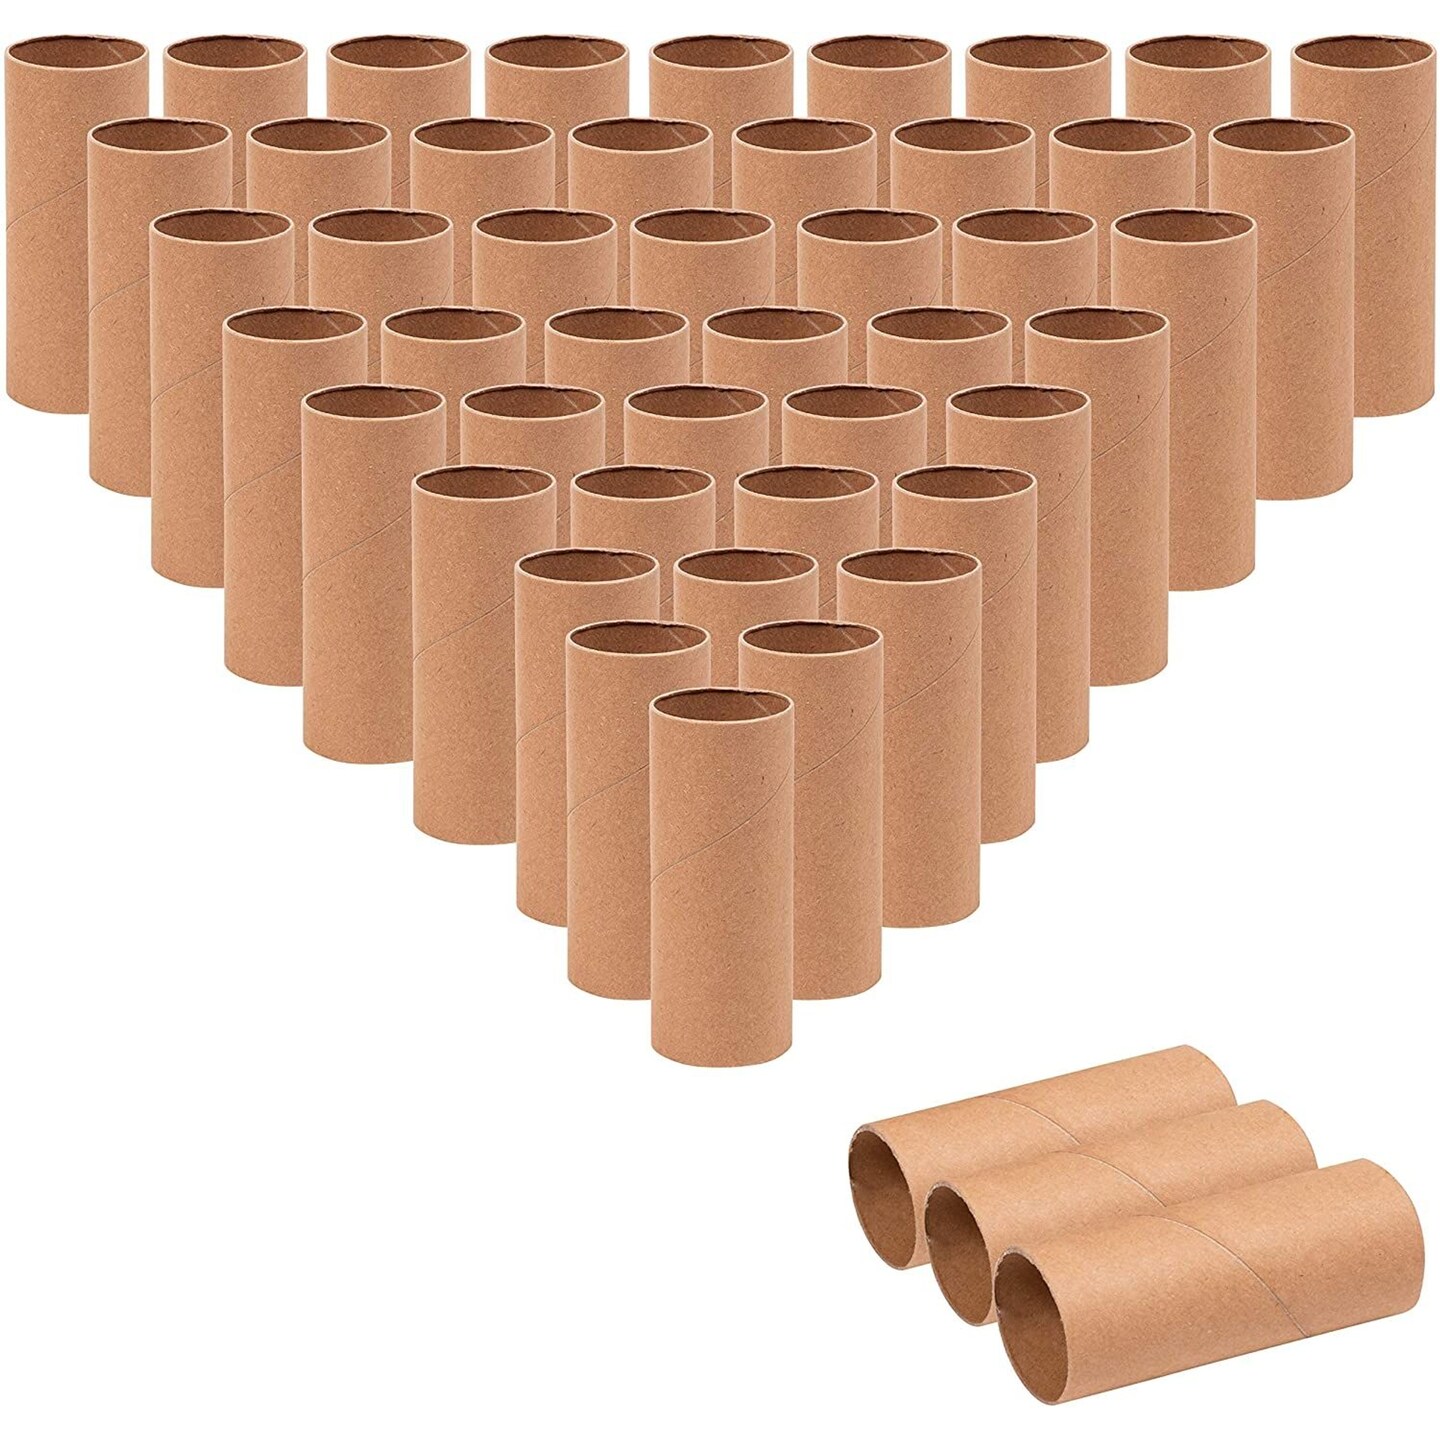 48 Pack Empty Toilet Paper Rolls for Crafts, Brown Cardboard Tubes for DIY,  Classrooms, Dioramas (1.6 x 4 In)